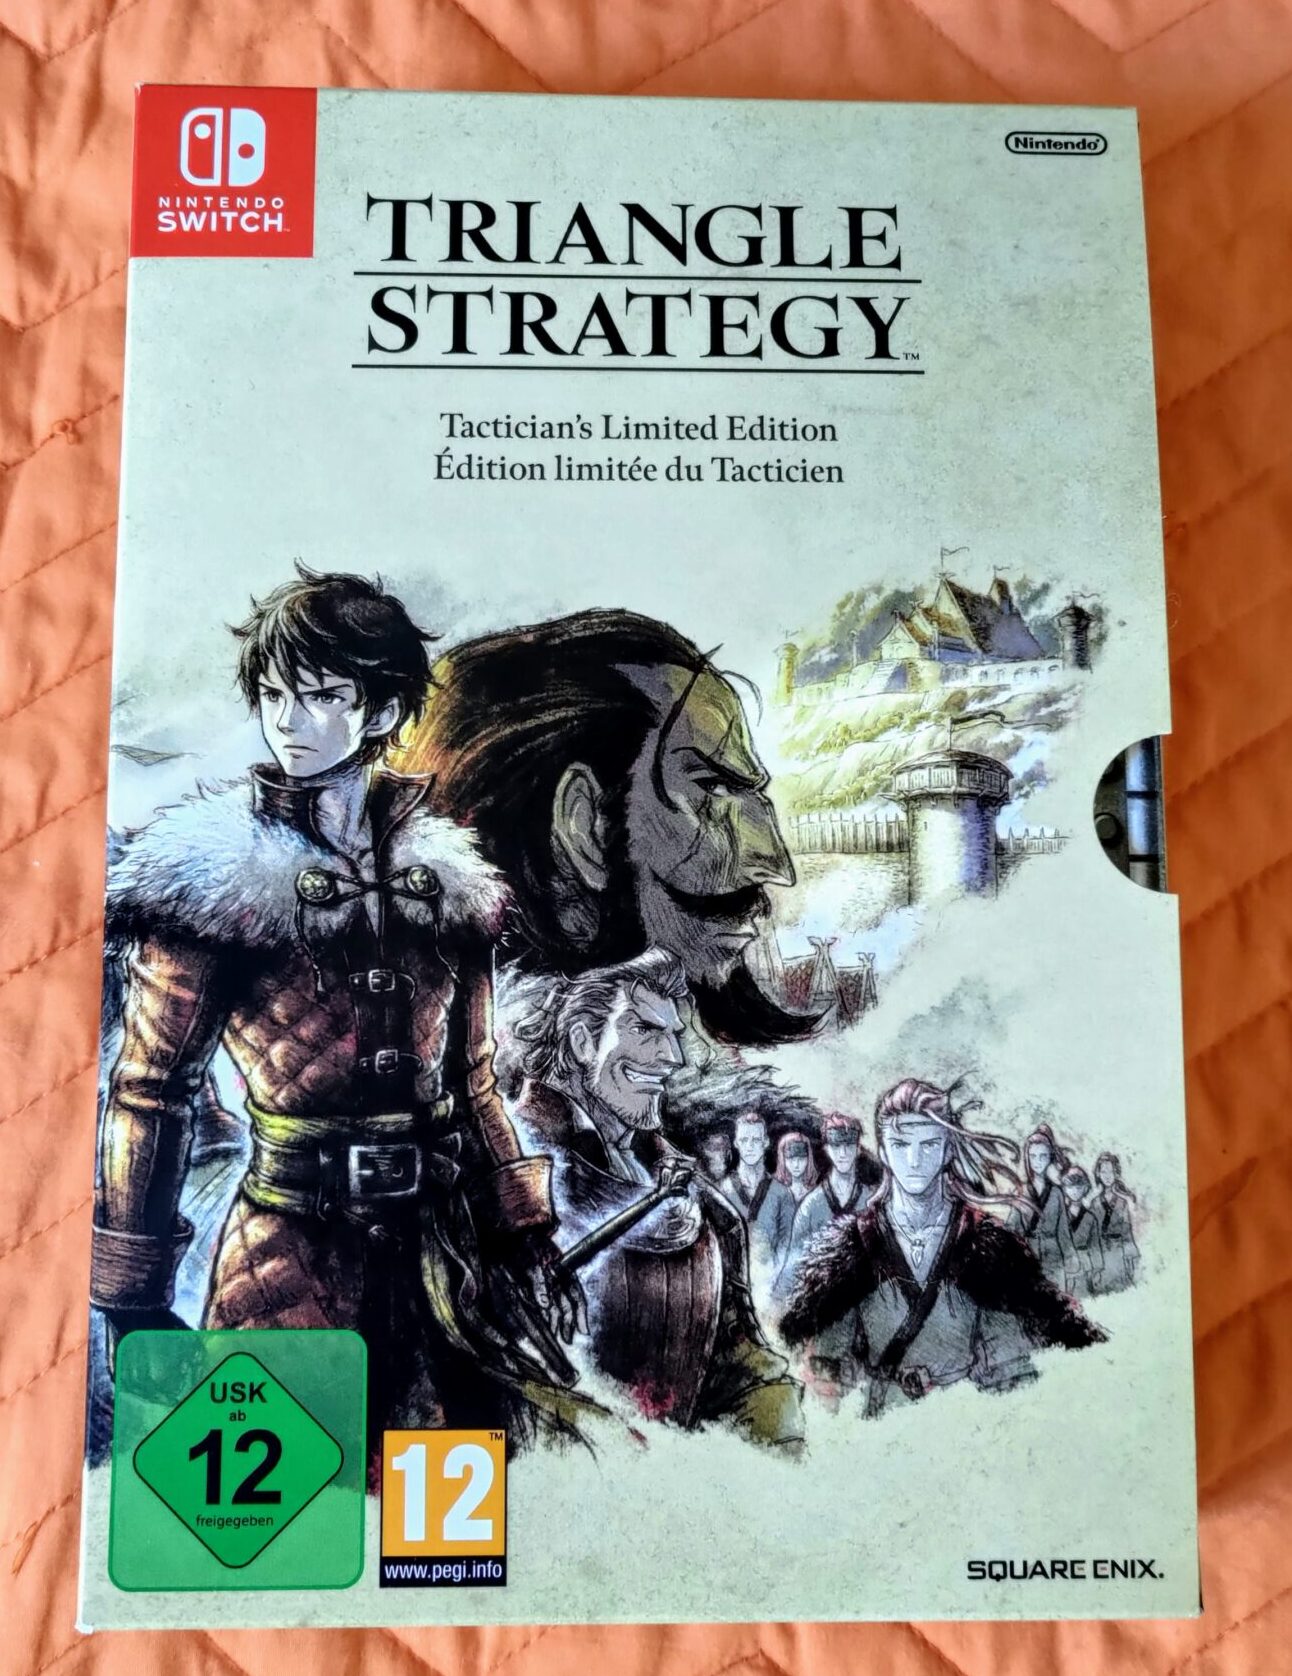 Triangle Strategy, frontale Tactician's Limited Edition